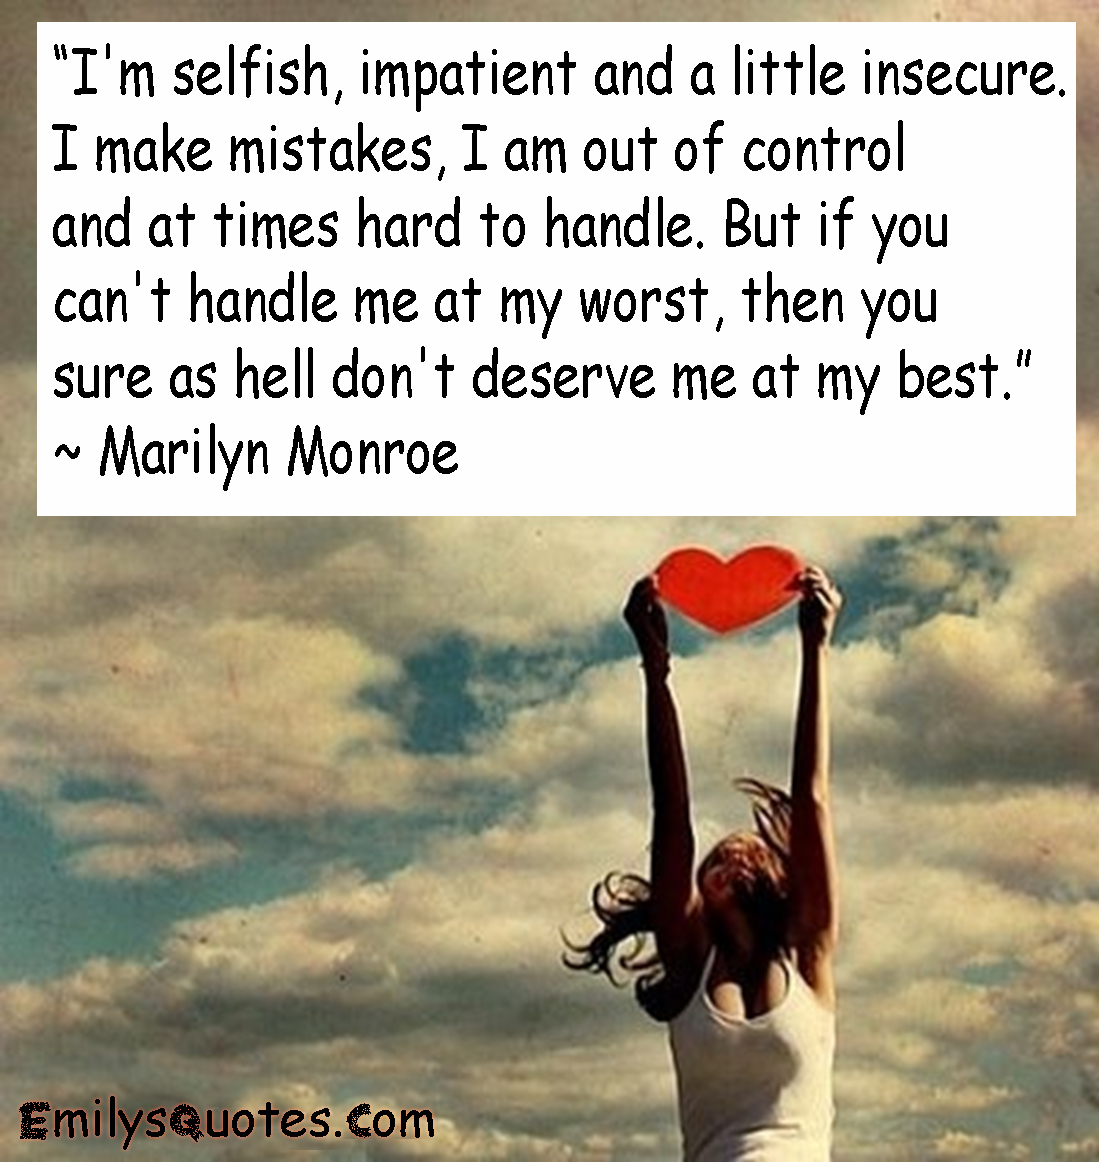 I’m selfish, impatient and a little insecure. I make mistakes, I am out of control and at times hard to handle.